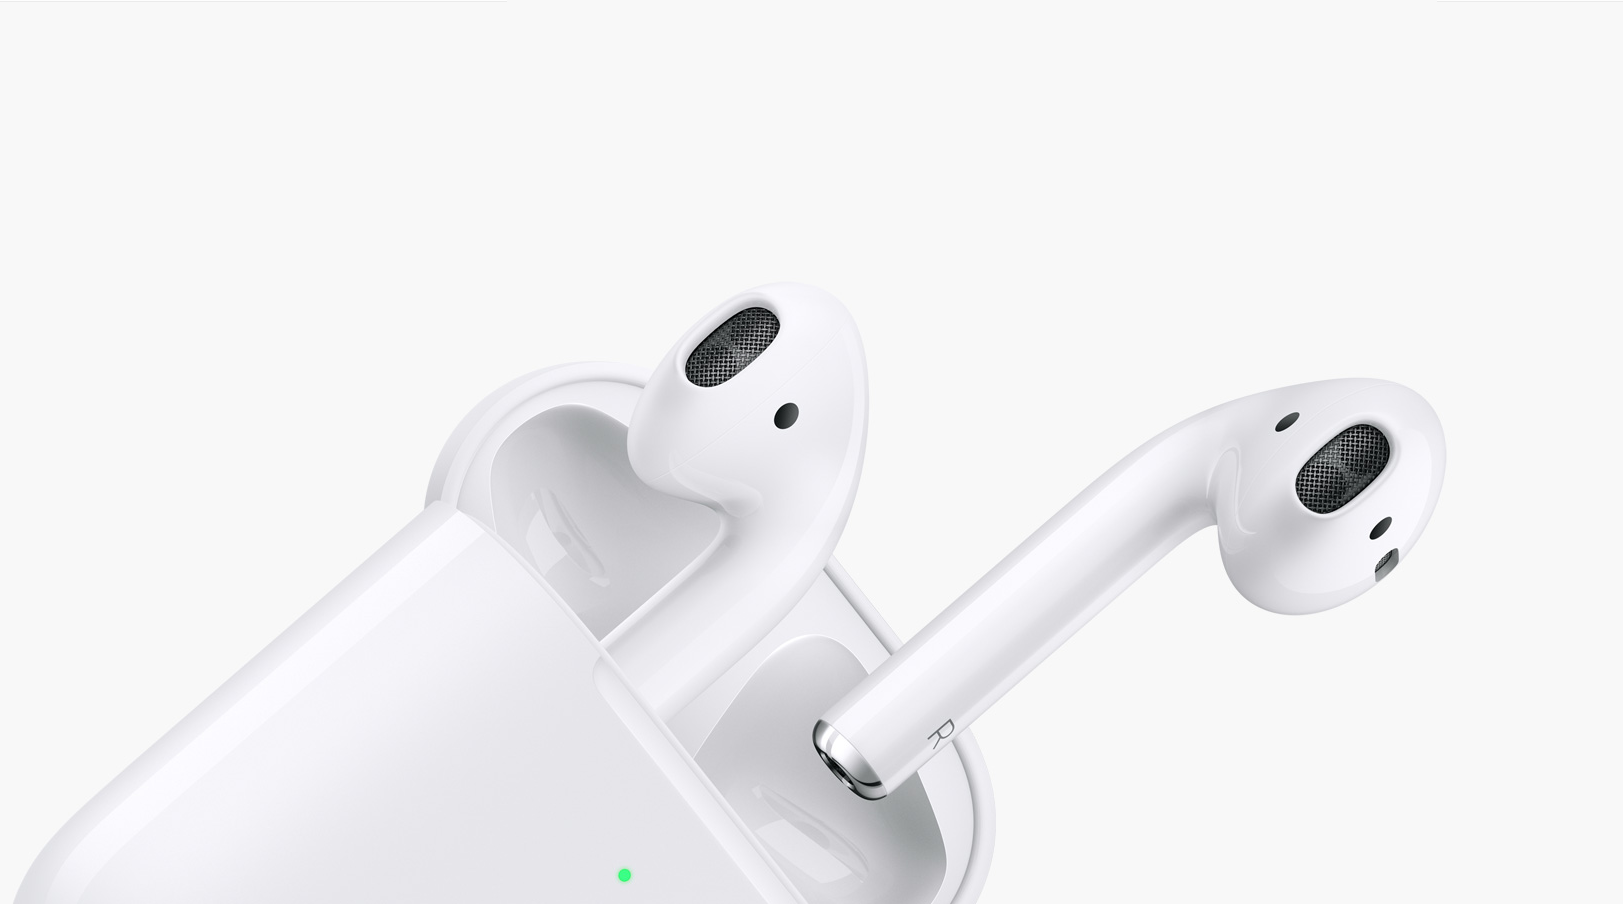 Airpods not Connecting to iPhone: Here is How to Fix